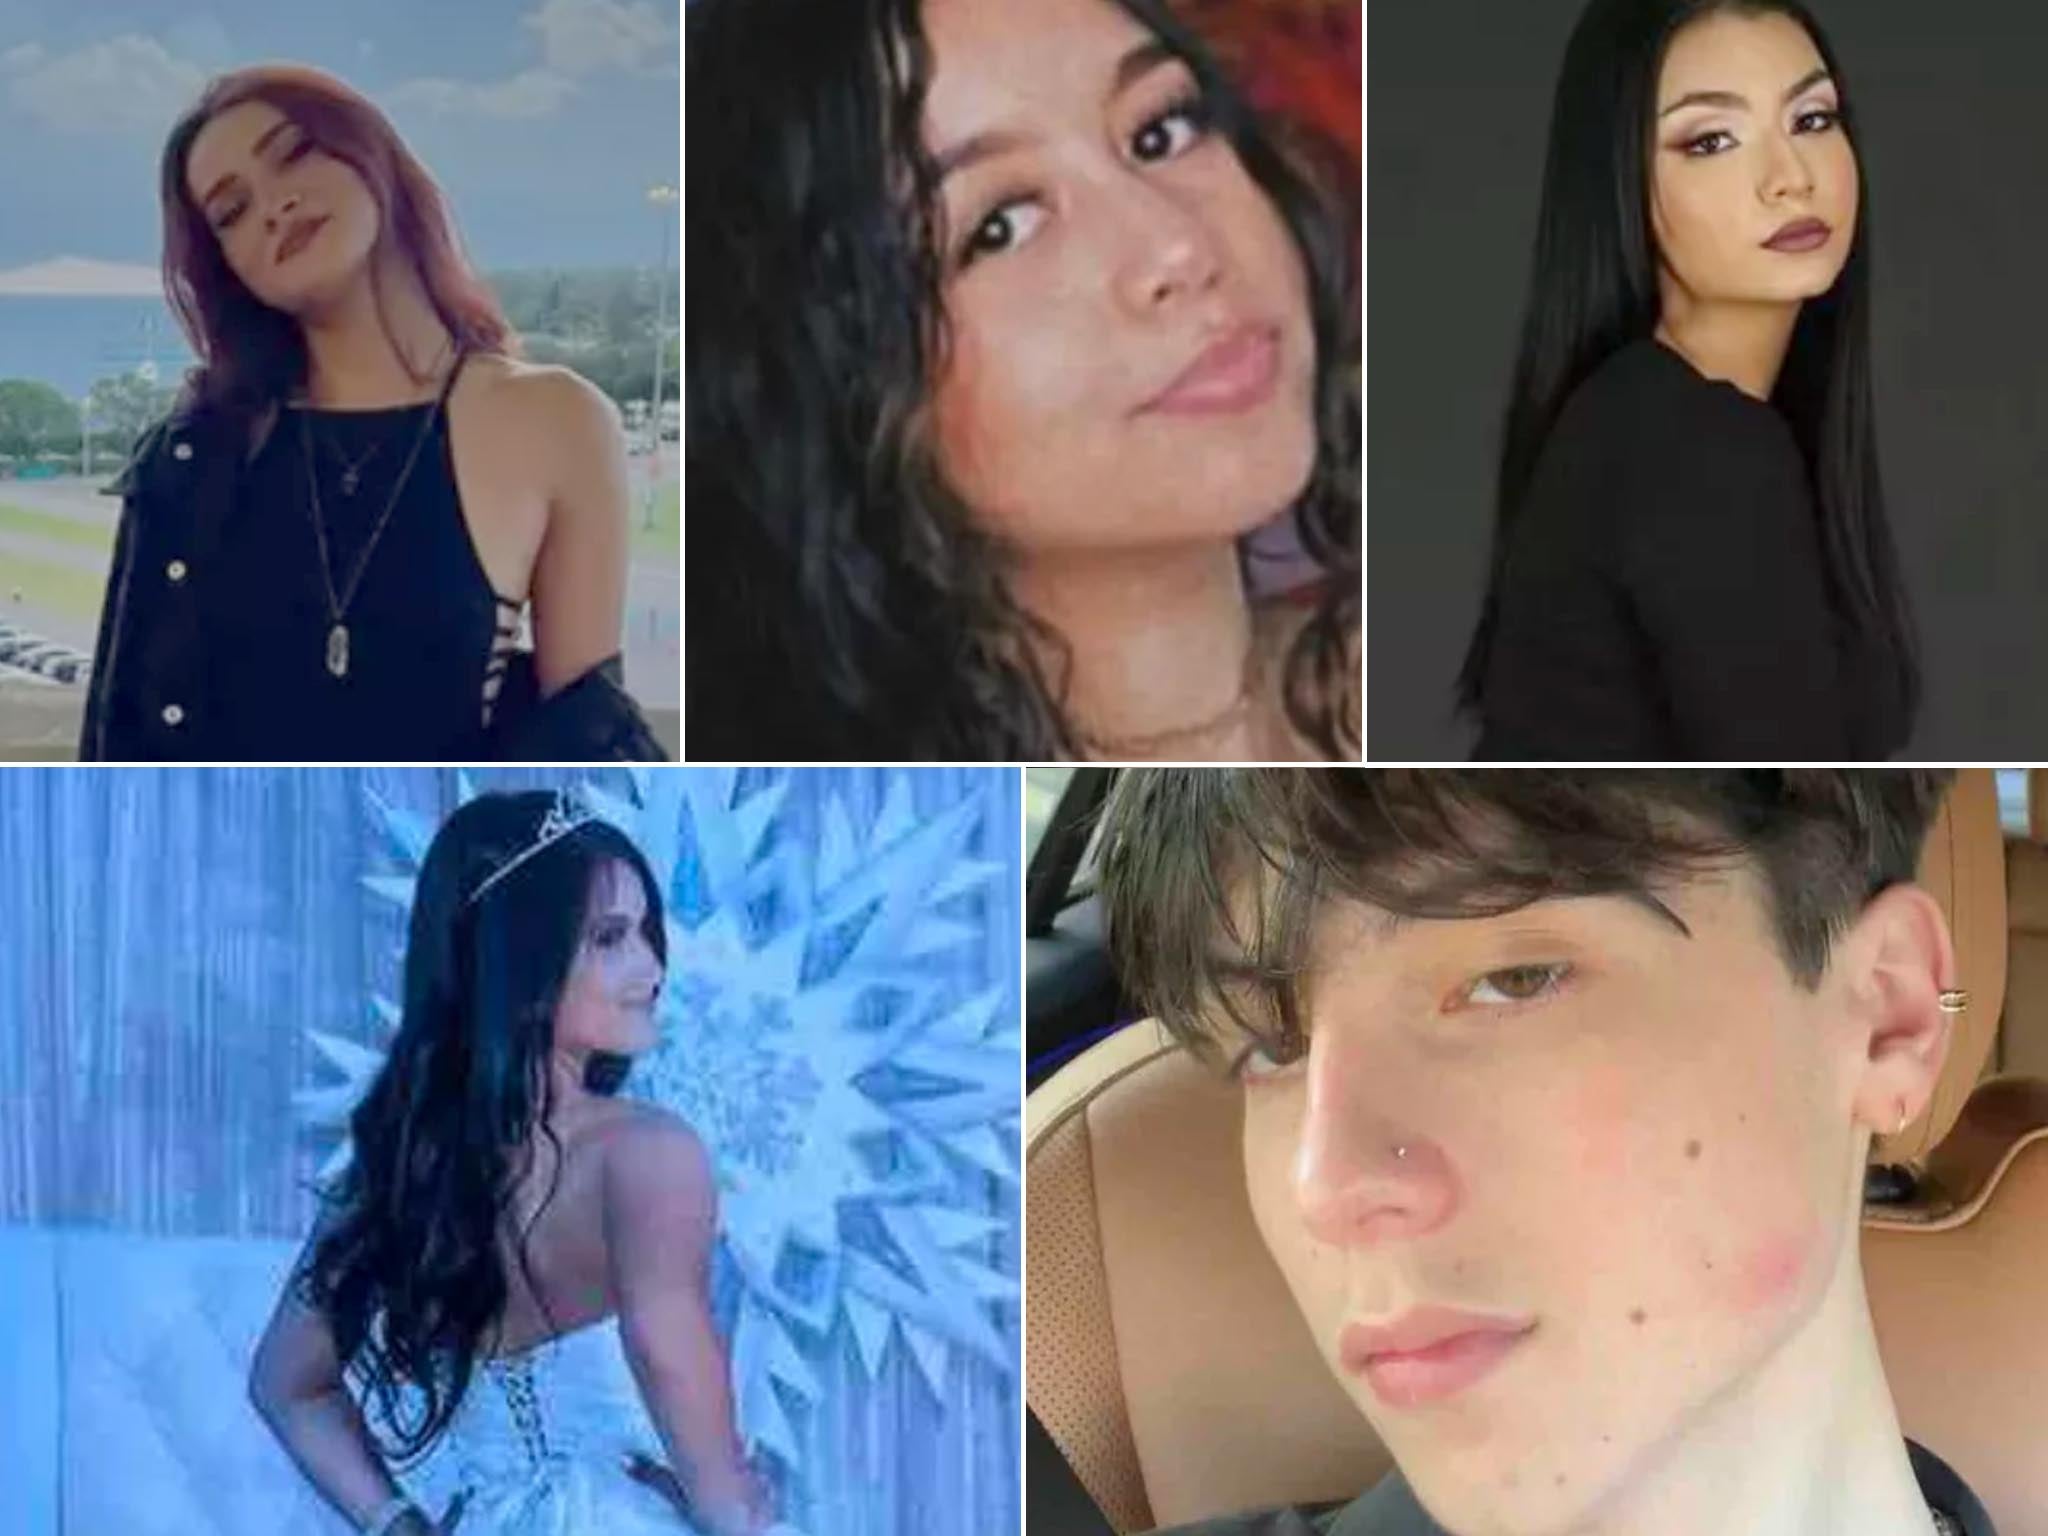 Five friends killed in wrong-way car crash on Florida highway: They didnt deserve such a short life